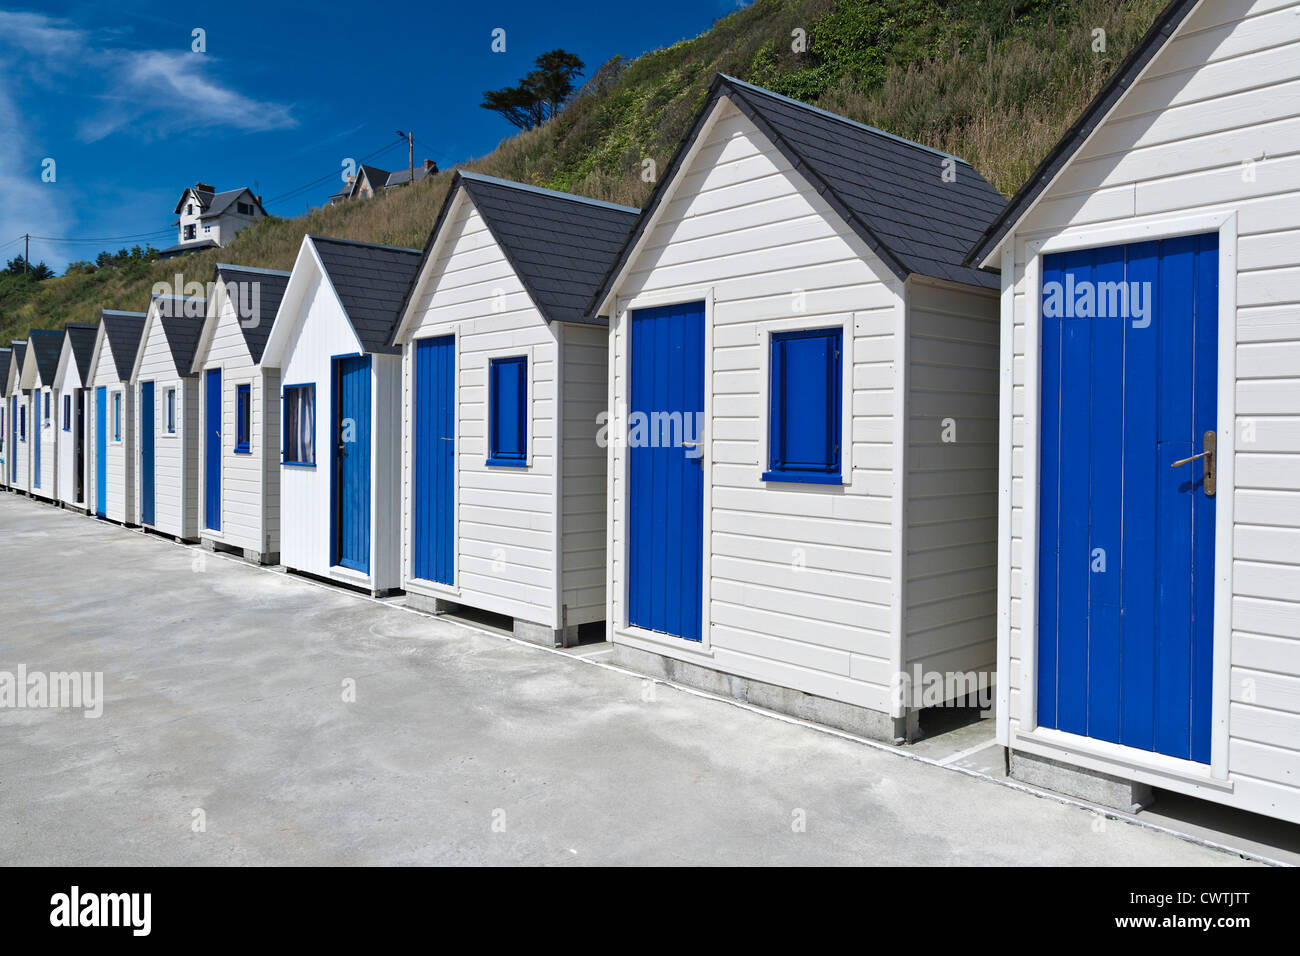 Famous Beach Huts in Trouville, Normandy, France Stock Photo